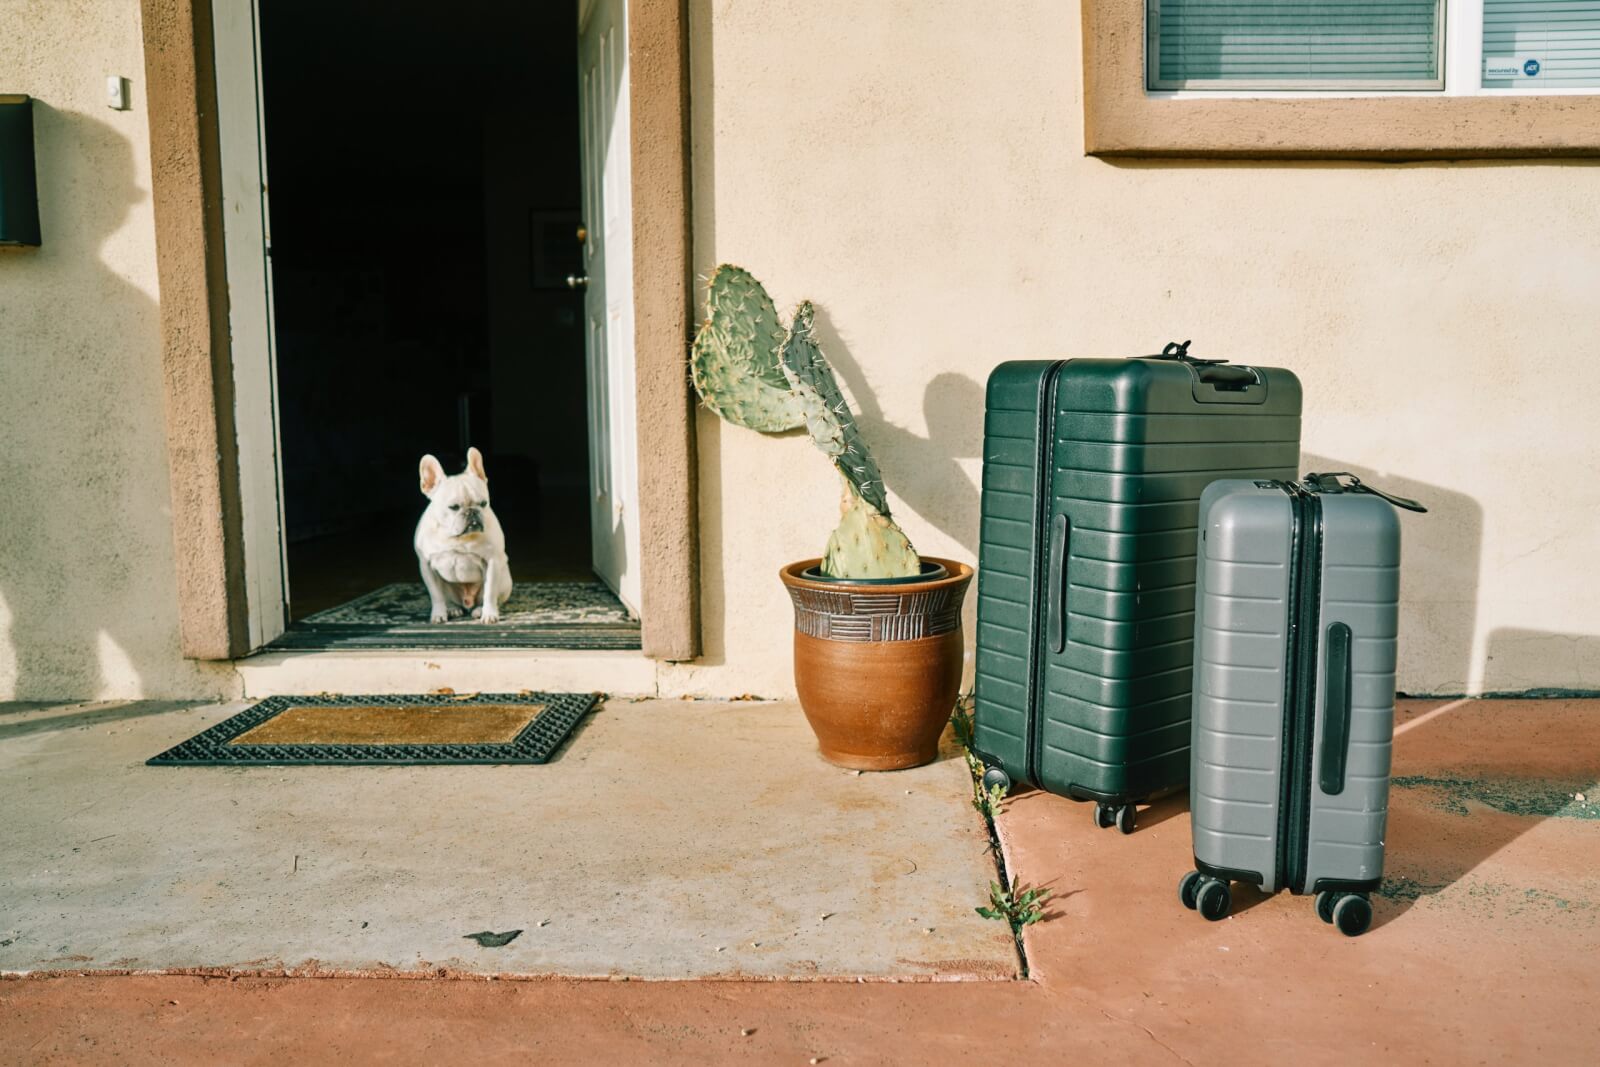 A French bulldog sits in the doorway, curiously looking at a set of luggage.